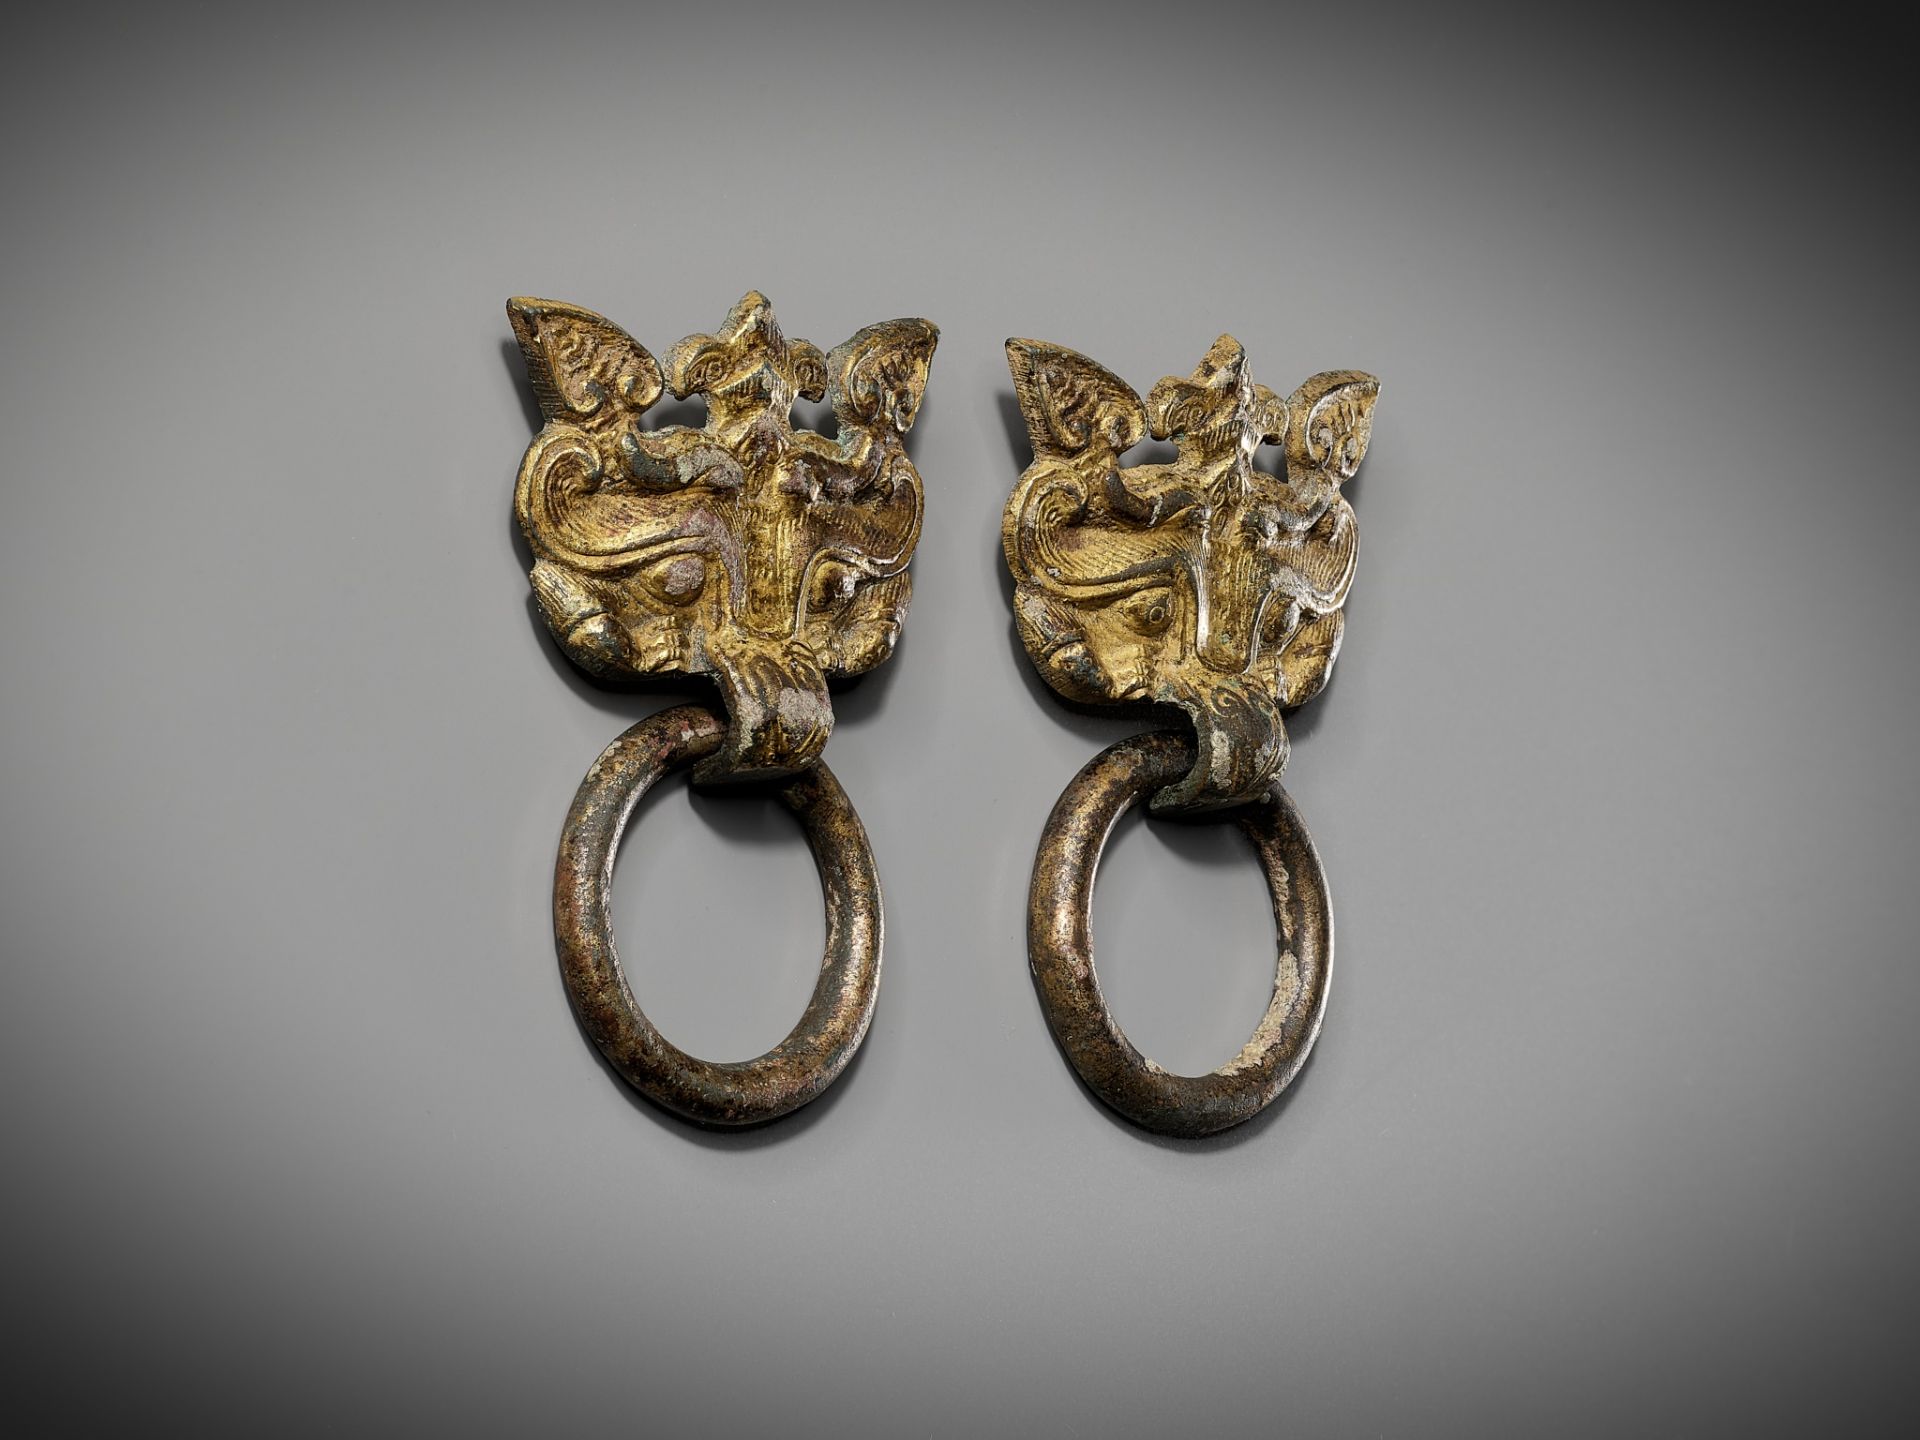 A PAIR OF GILT-BRONZE TAOTIE MASKS WITH RING HANDLES, WARRING STATES TO HAN DYNASTY - Image 7 of 11